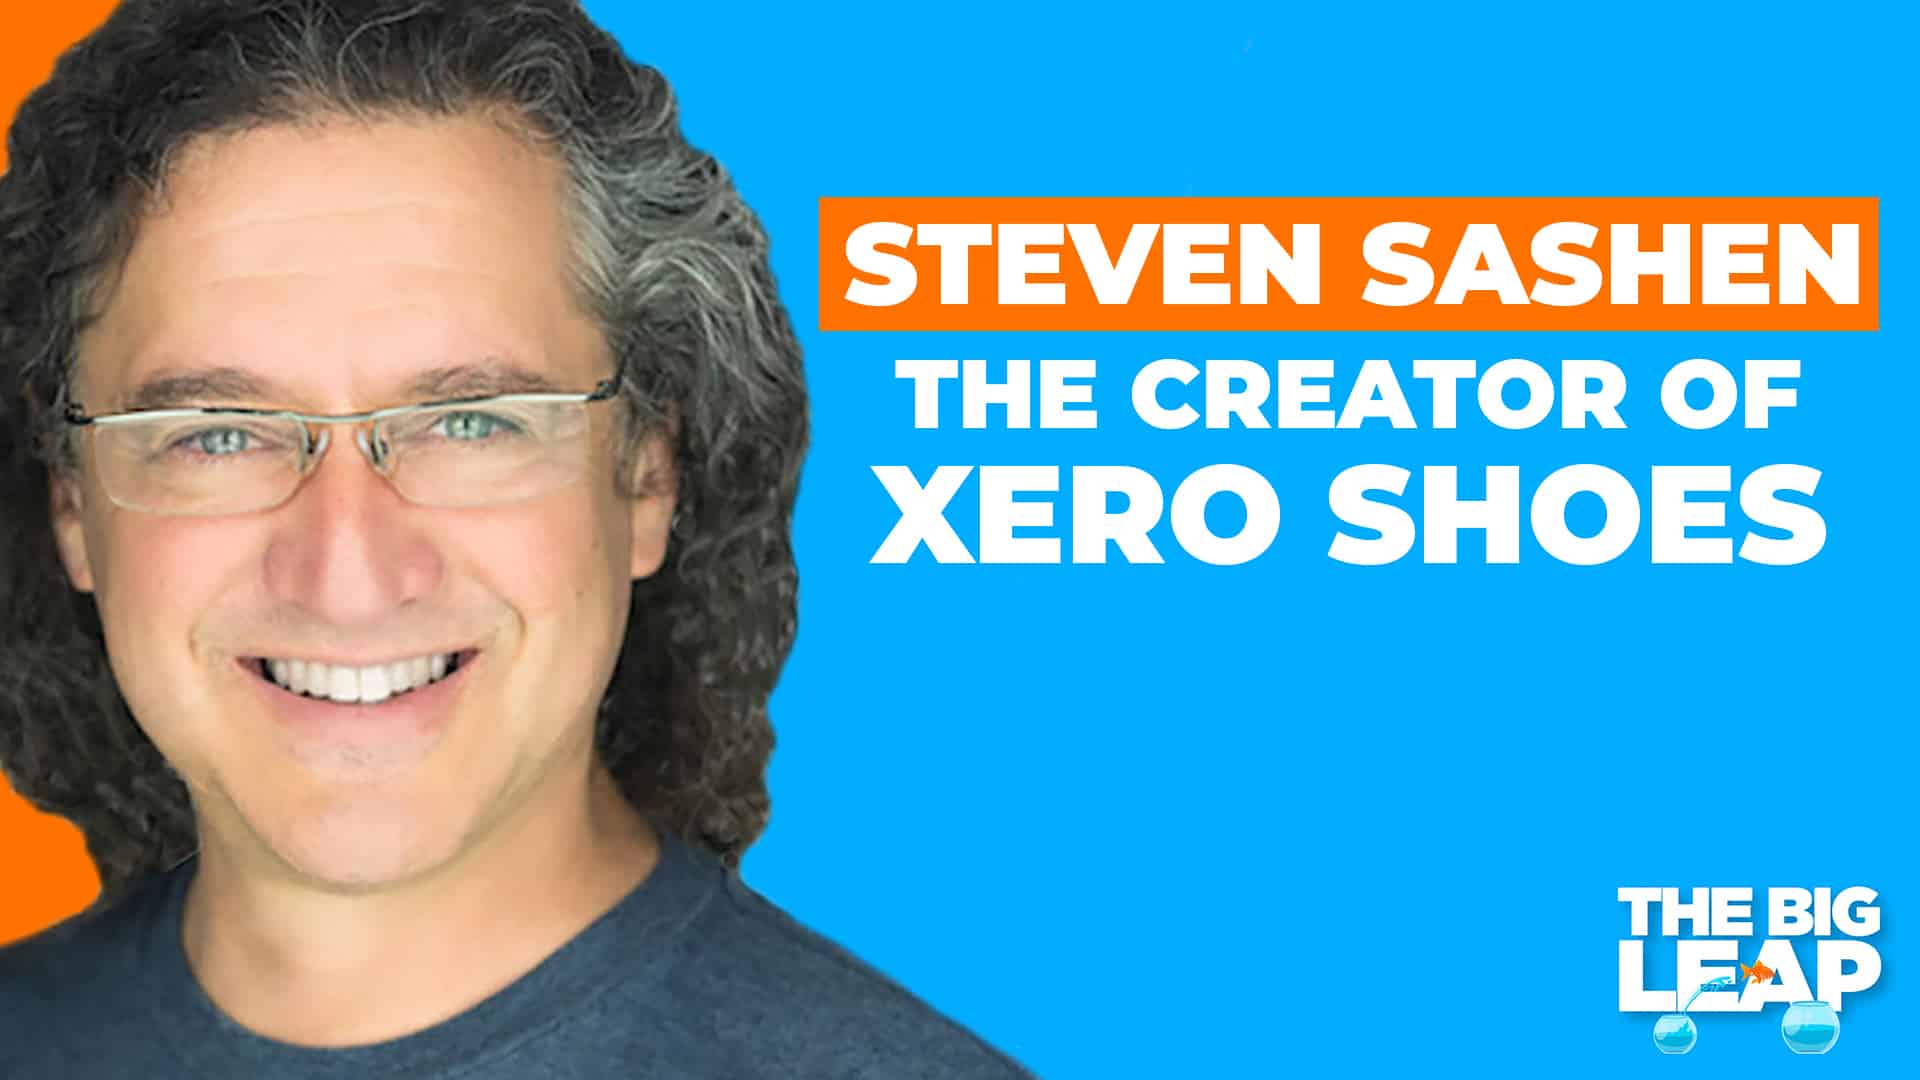 The Big Leap Episode 77 Cover Photo showing a photo of Steven Sashen and the words "Steven Sashen - The Creator of Xero Shoes."